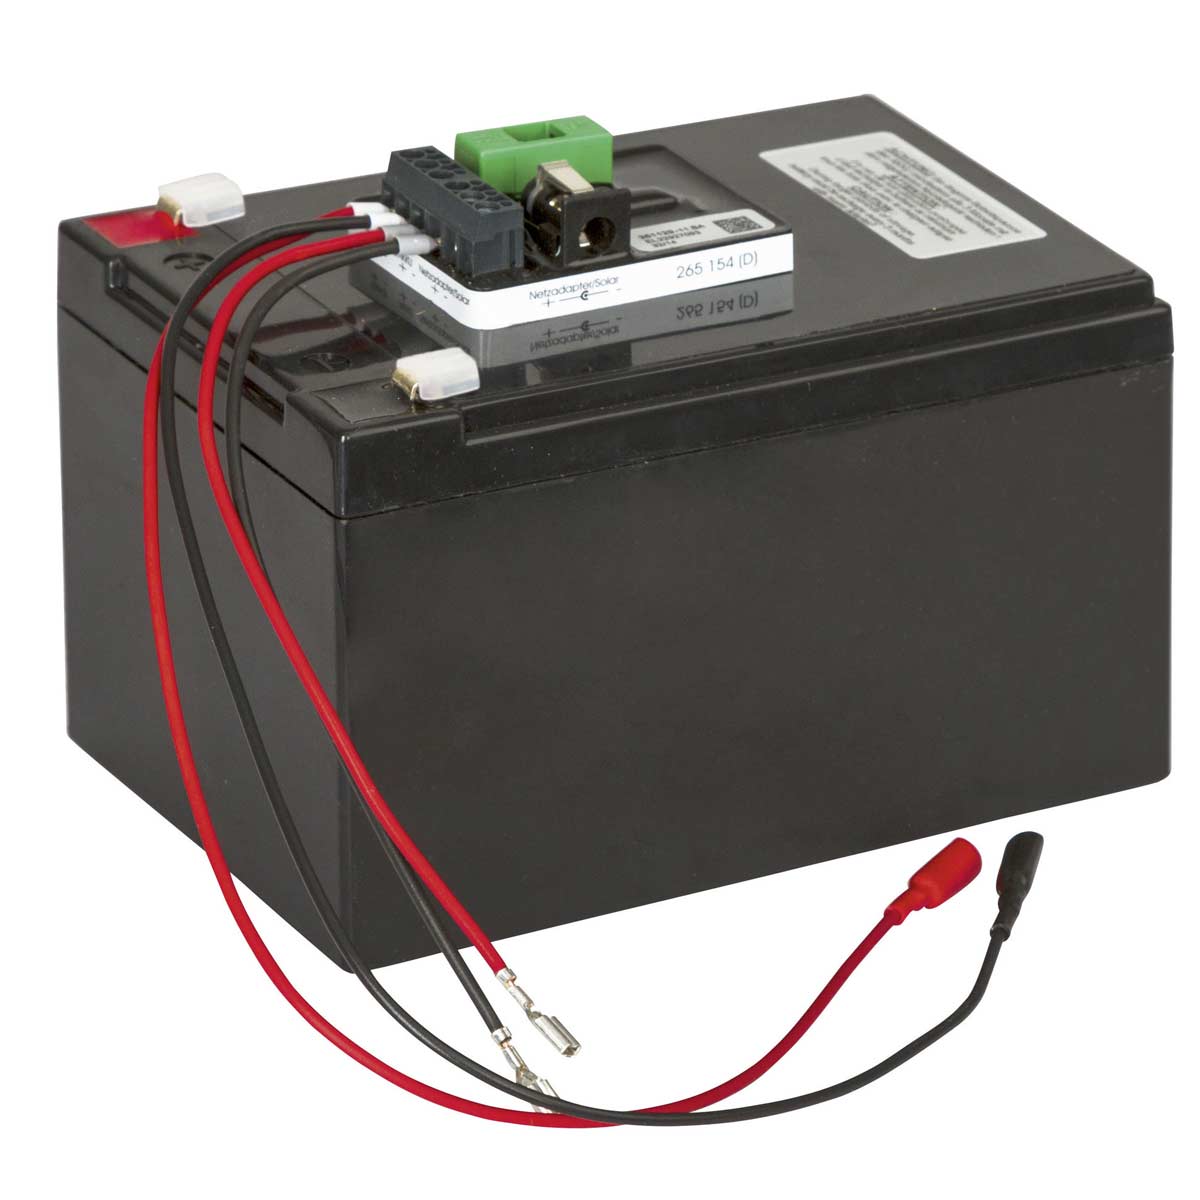 Premium AGM battery 12V 15Ah with charge controller & charger